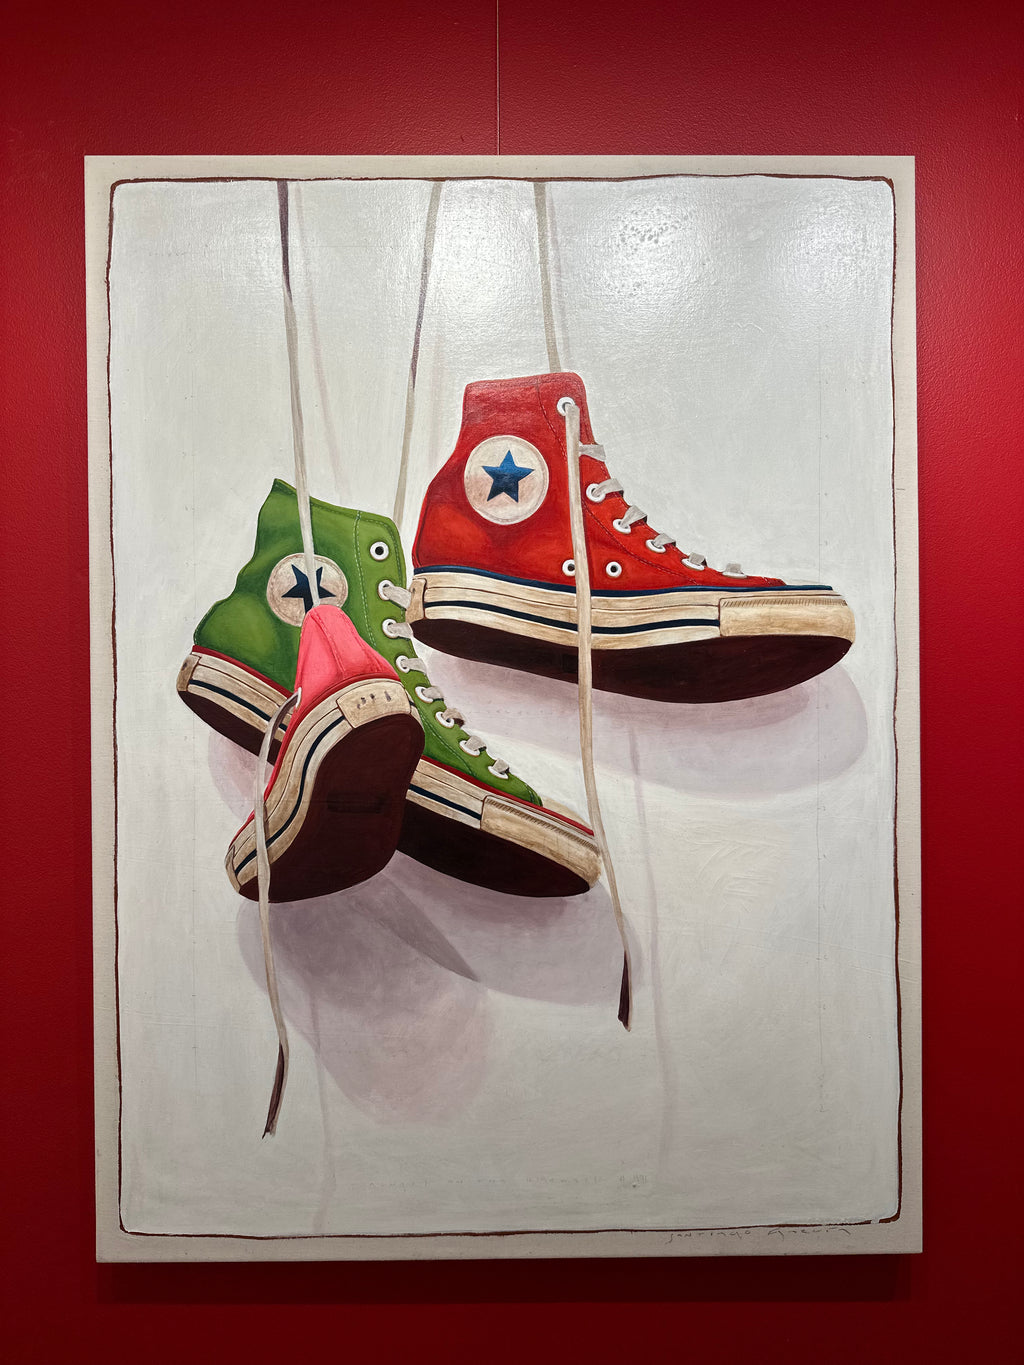 Still life oil painting by Santiago Garcia of a red, green, and pink converse sneaker hanging by shoe laces on a white shadowed canvas